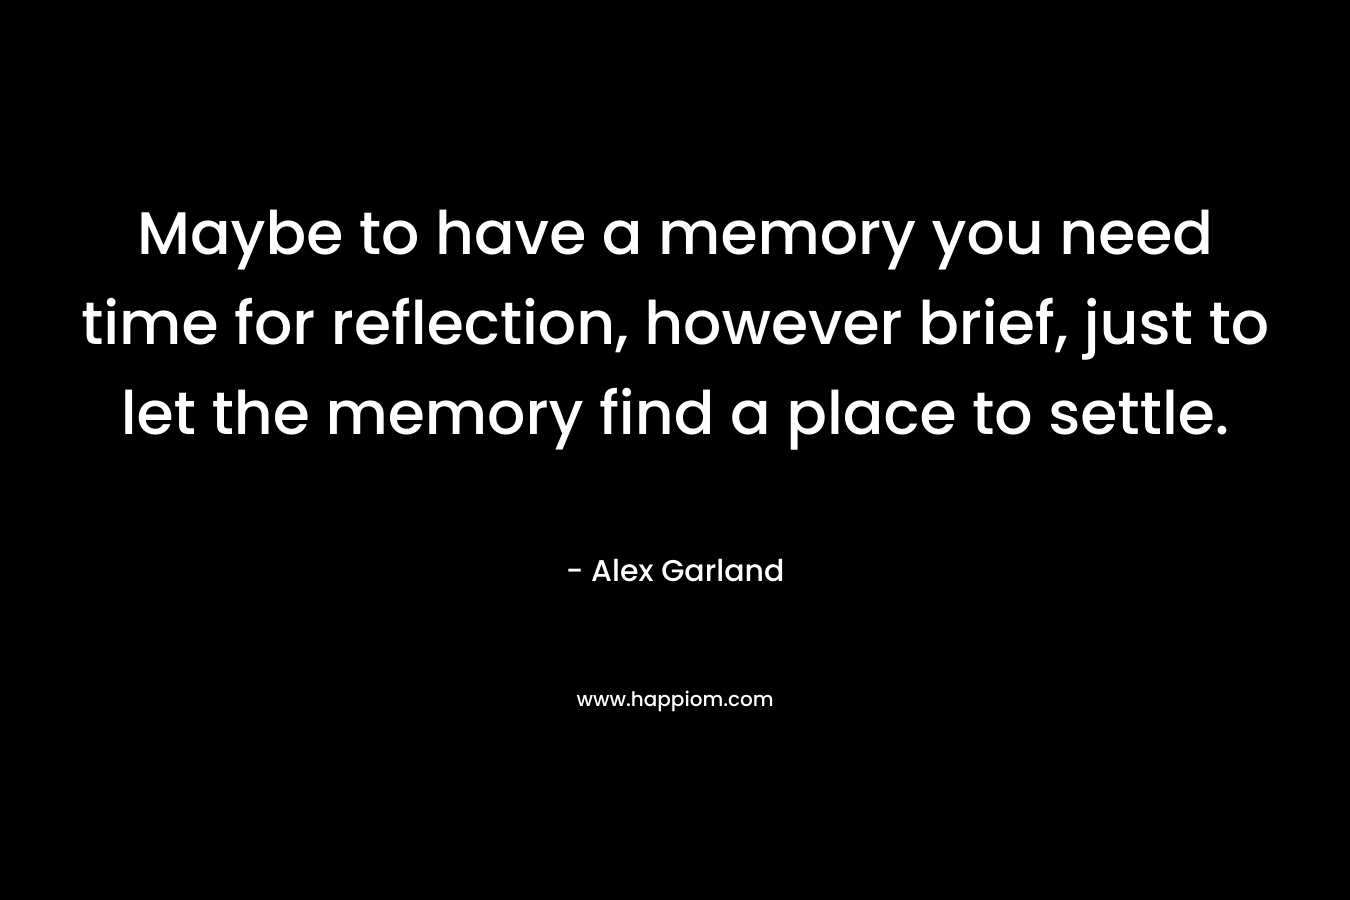 Maybe to have a memory you need time for reflection, however brief, just to let the memory find a place to settle. – Alex Garland